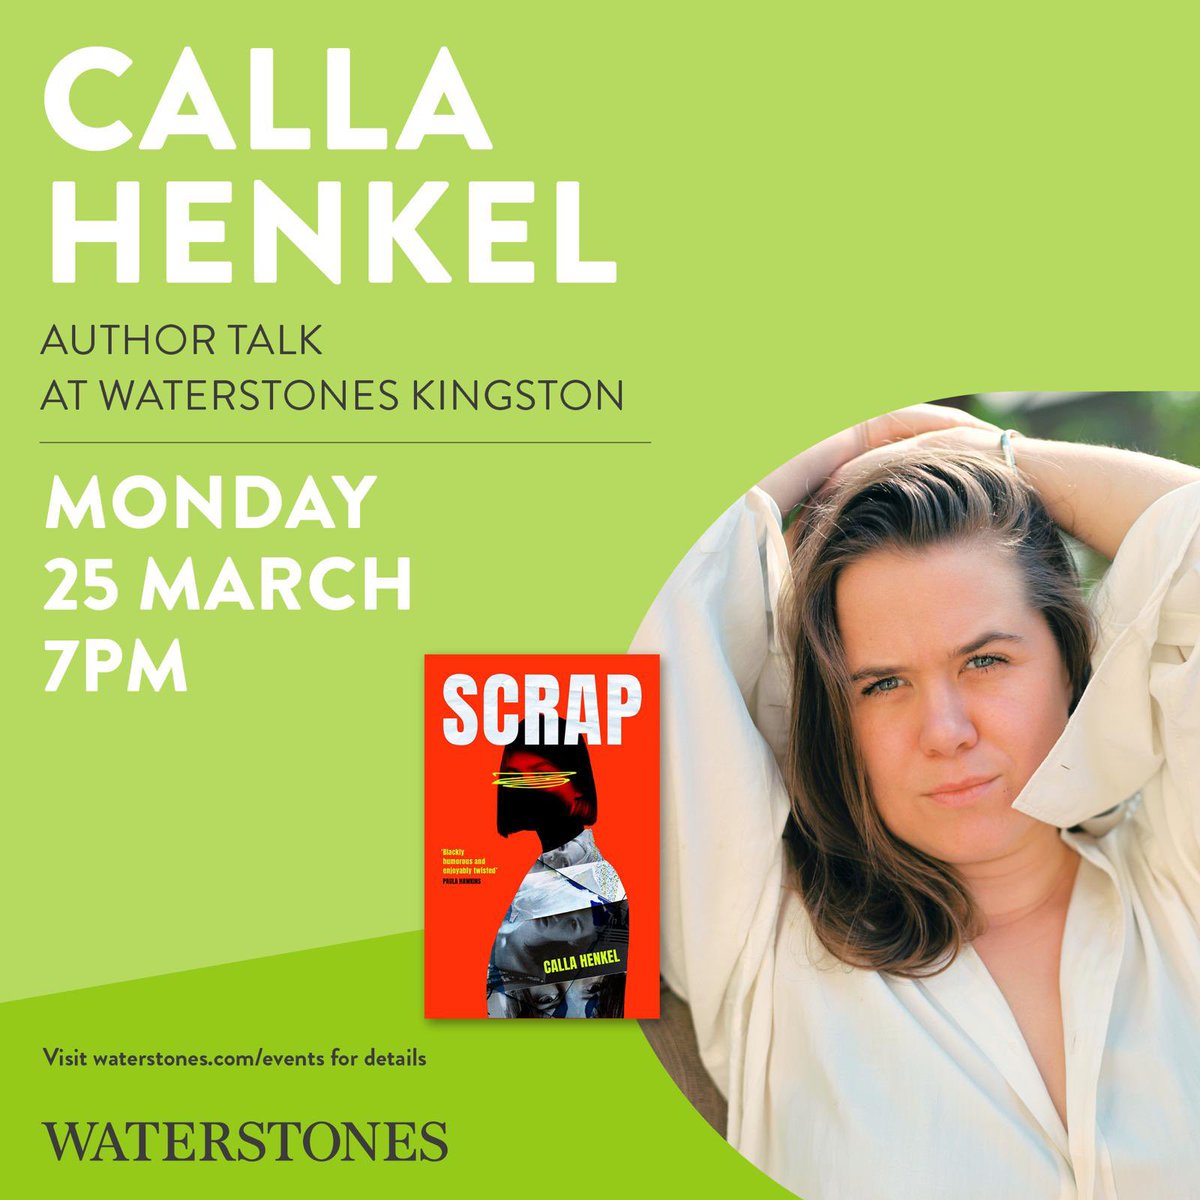 Calla Henkel will be visiting the shop to discuss her amazing new book SCRAP. The wonderful @JuliaArmfield will also be in attendance, chairing the event. An event you don’t want to miss! Tickets available now: shorturl.at/dhjD3 @HodderBooks @HodderFiction